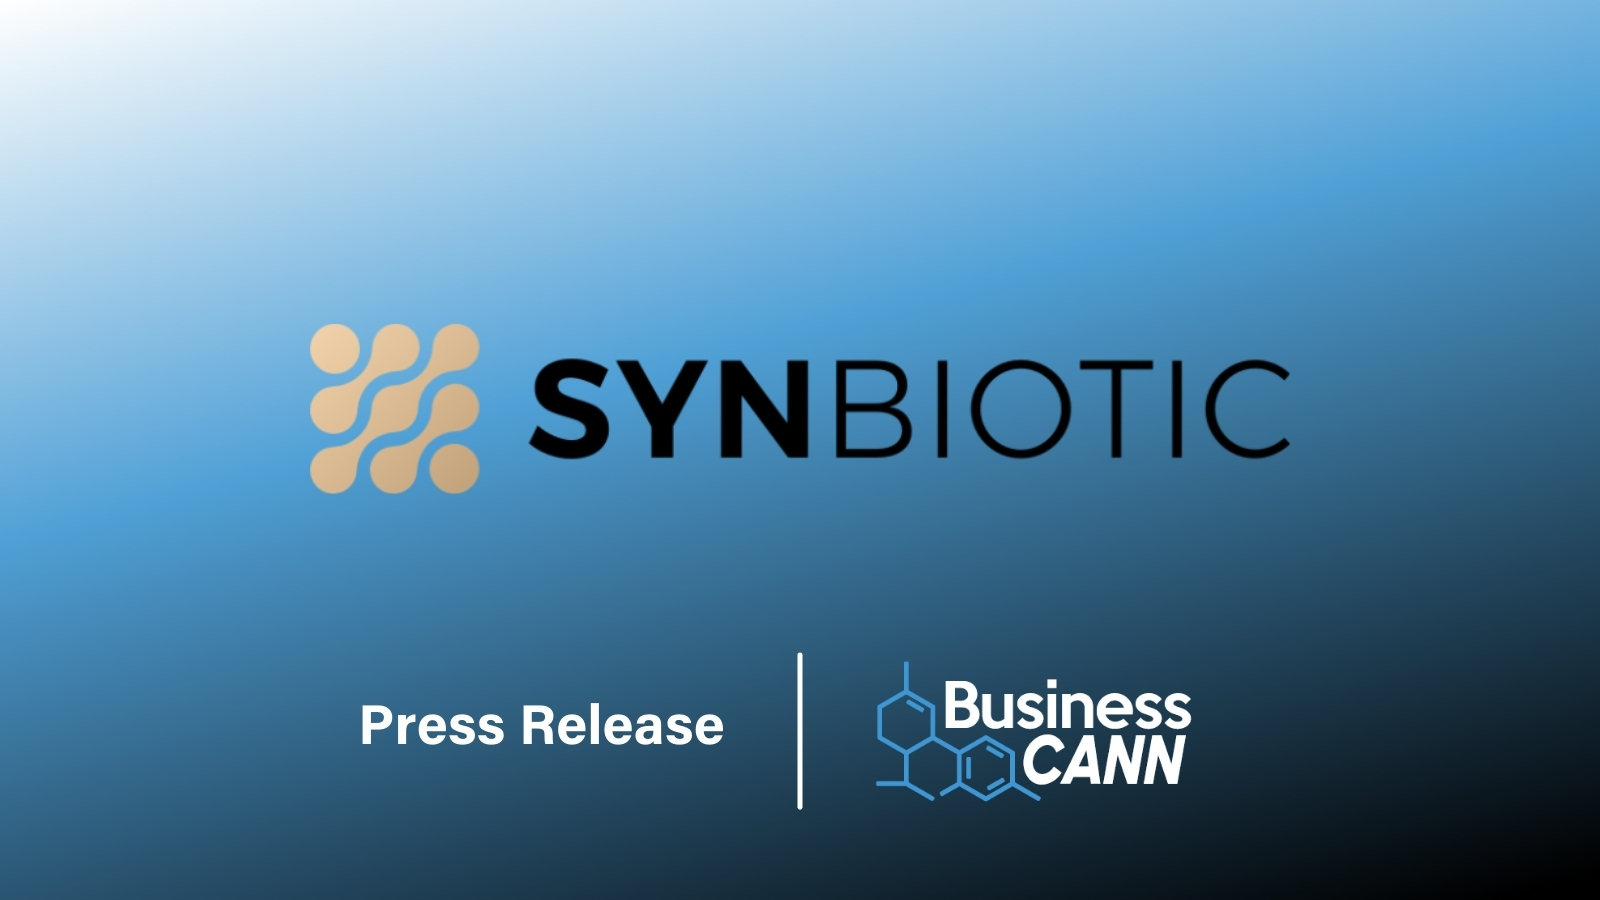 Synbiotic, Europe's largest listed corporate group in the hemp and cannabis sector supports launch with massive expansion of field sales force in the medical cannabis sector.